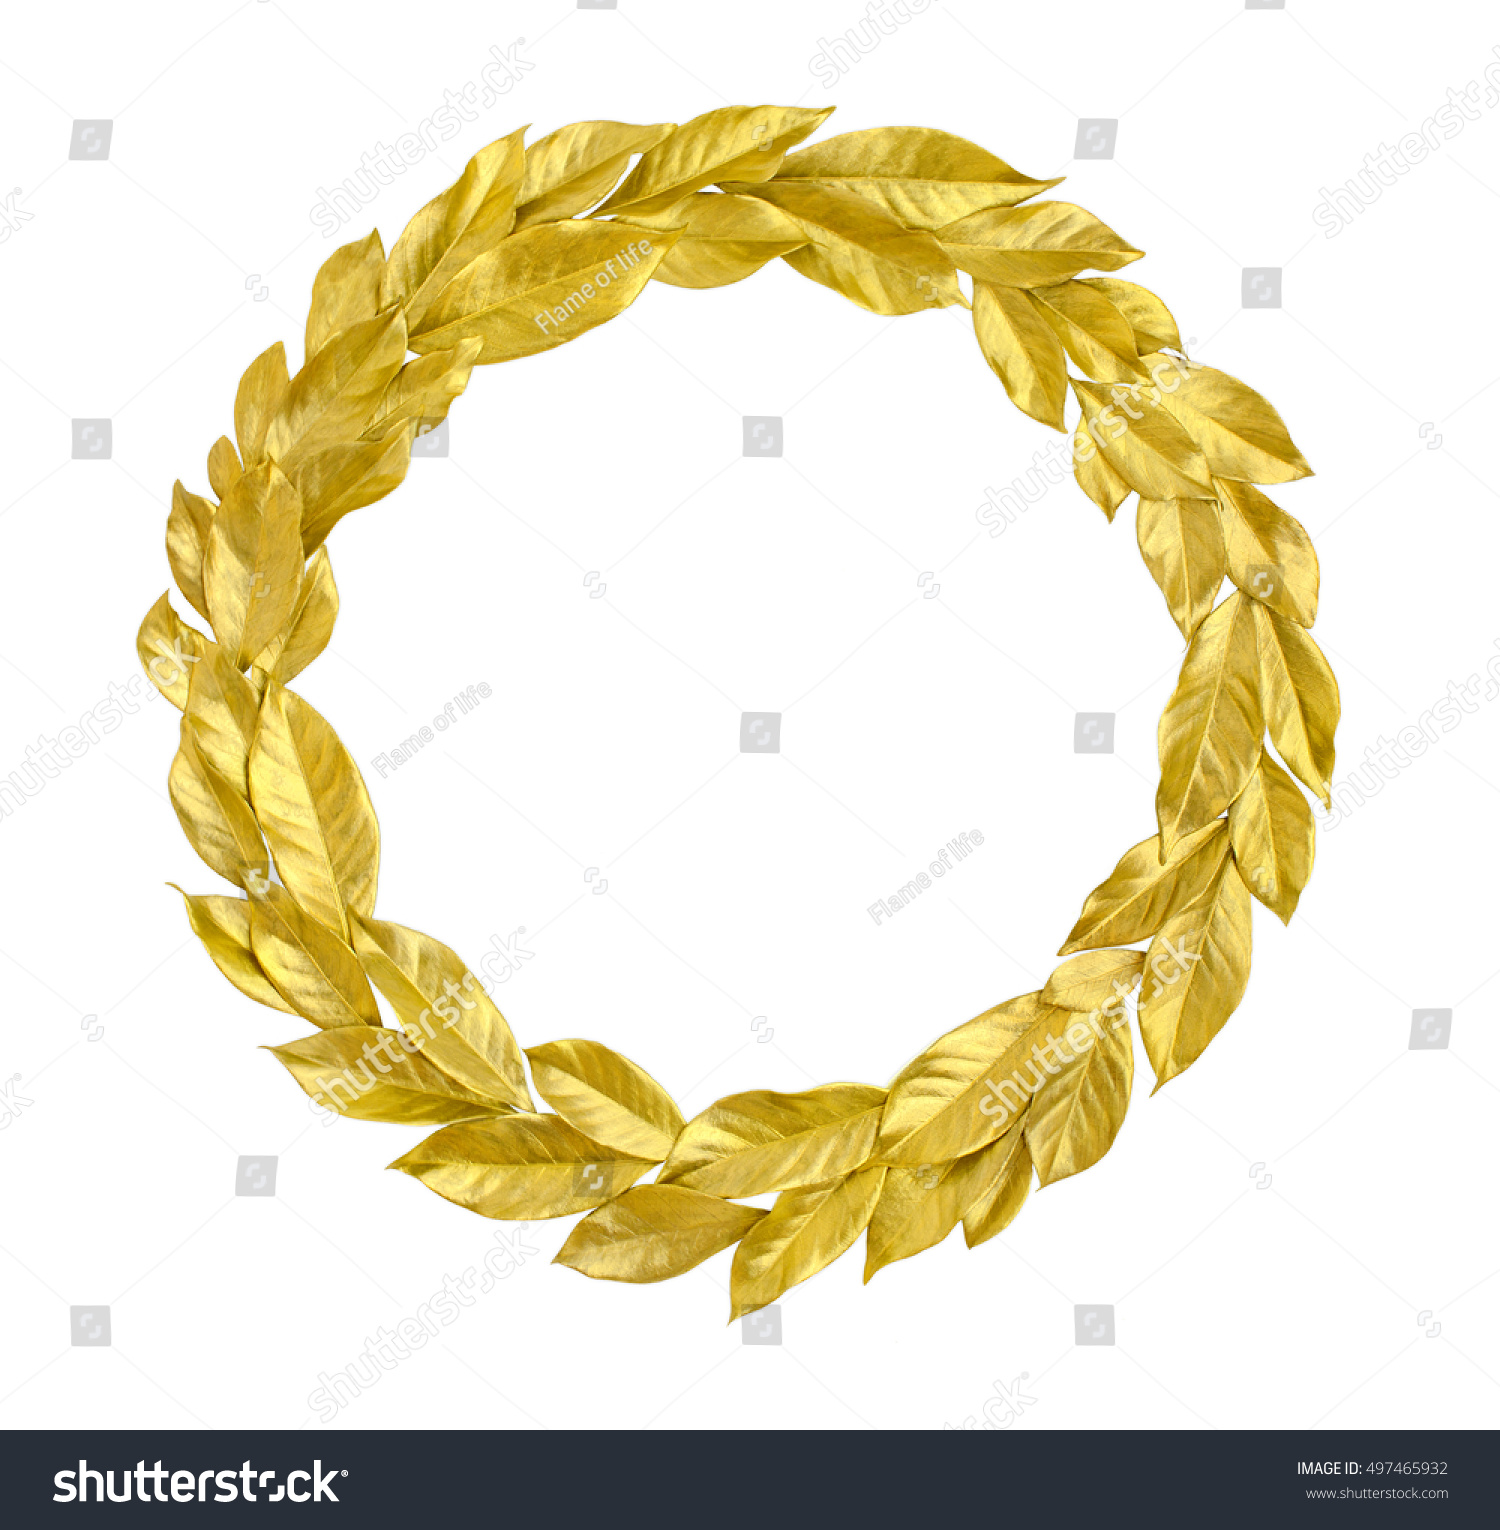 Round Laurel Wreath from golden leaves isolated on white background. Useful for holiday invitation, decorative design etc. #497465932